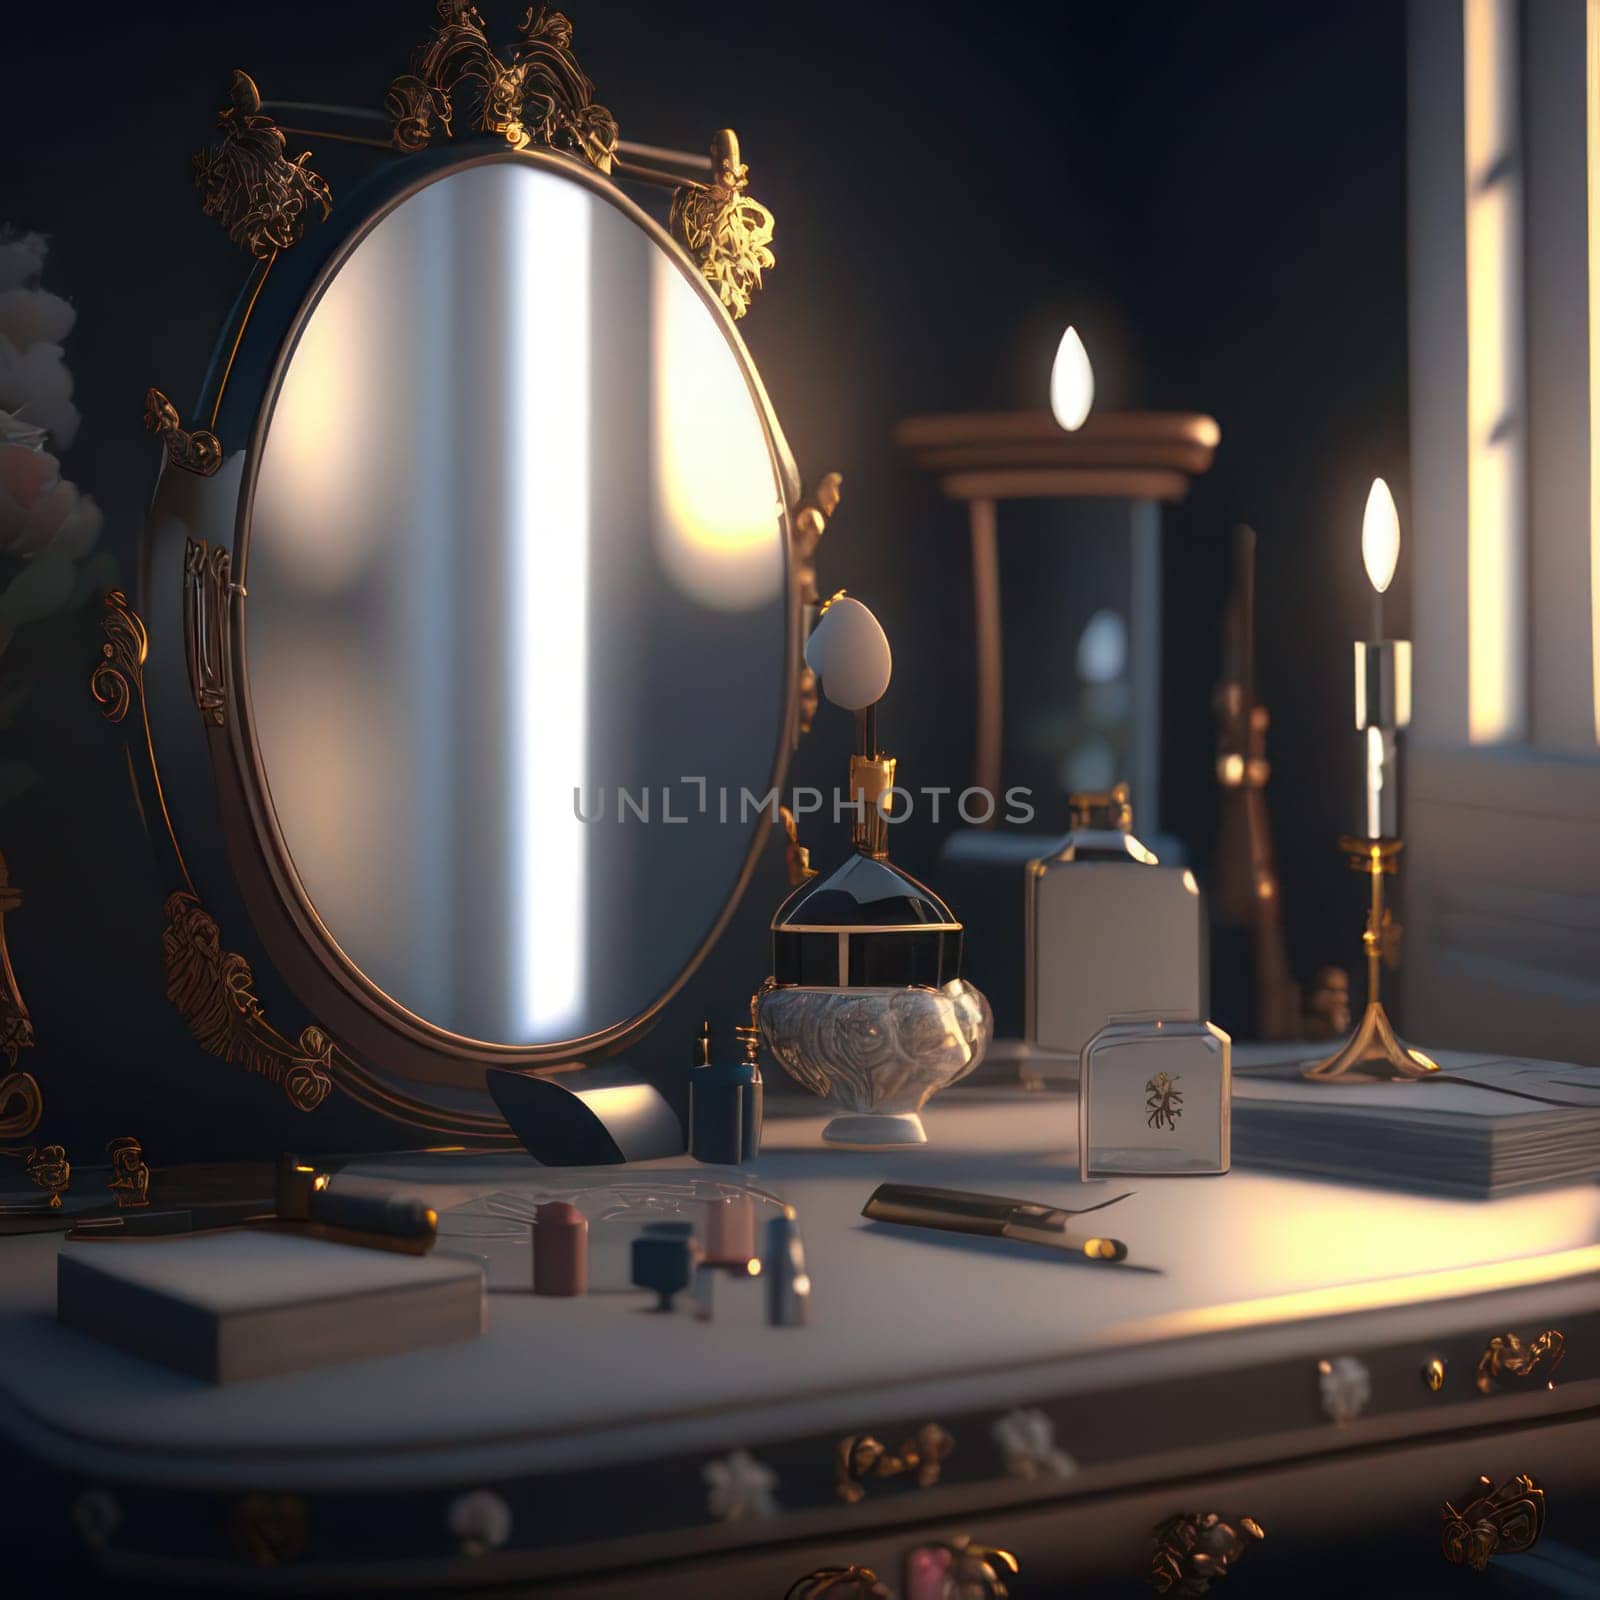 Dressing table. Image created by AI